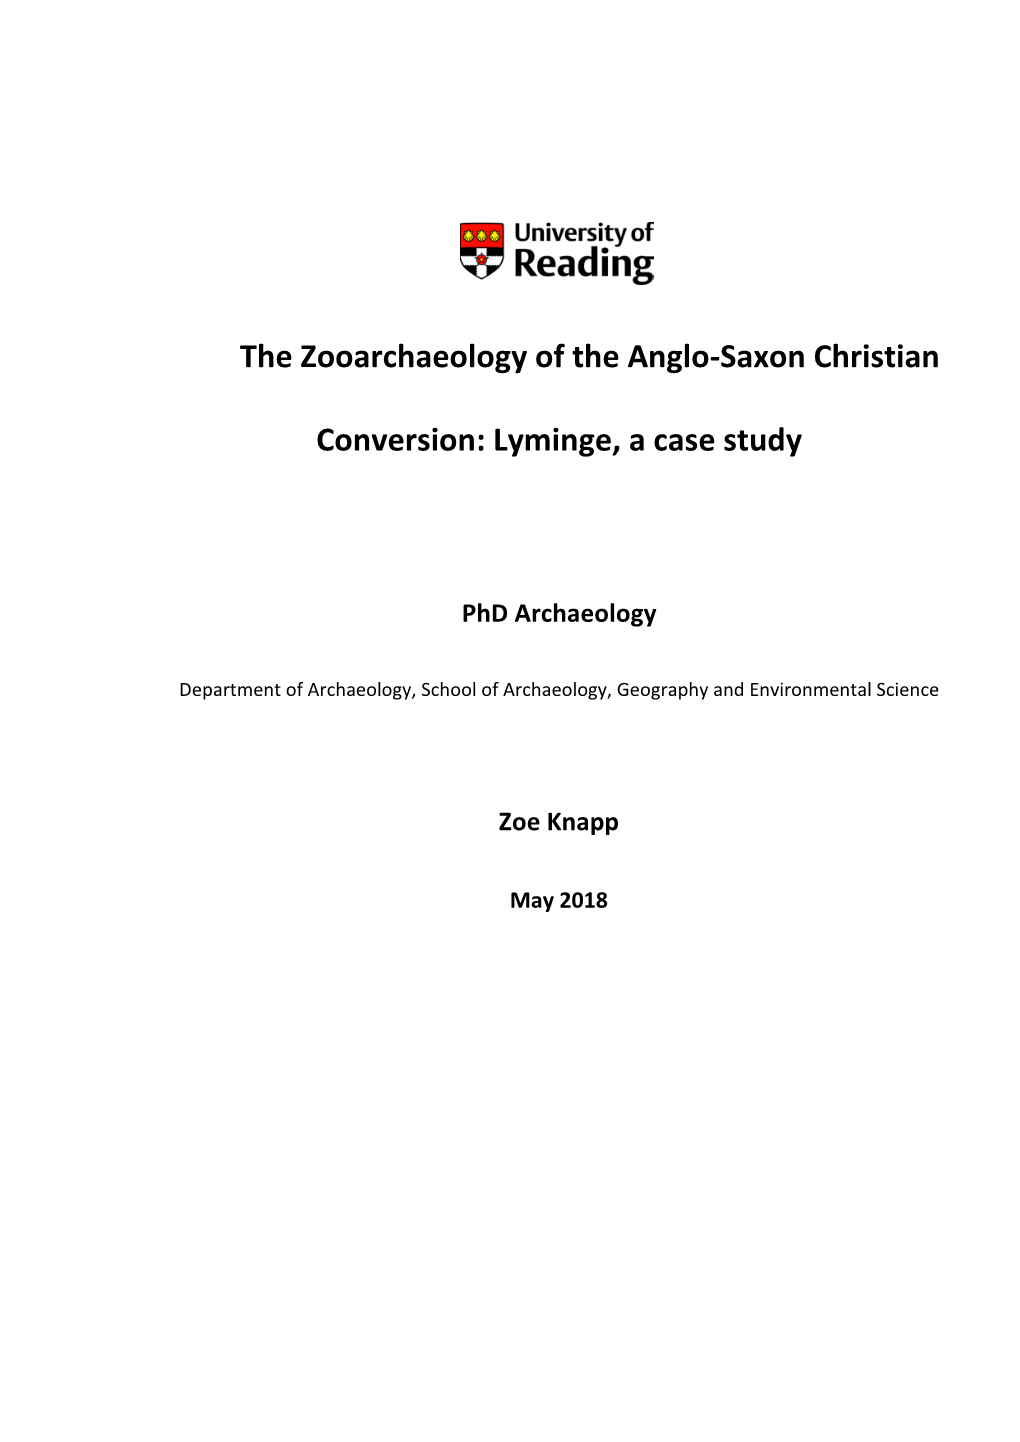 The Zooarchaeology of the Anglo-Saxon Christian